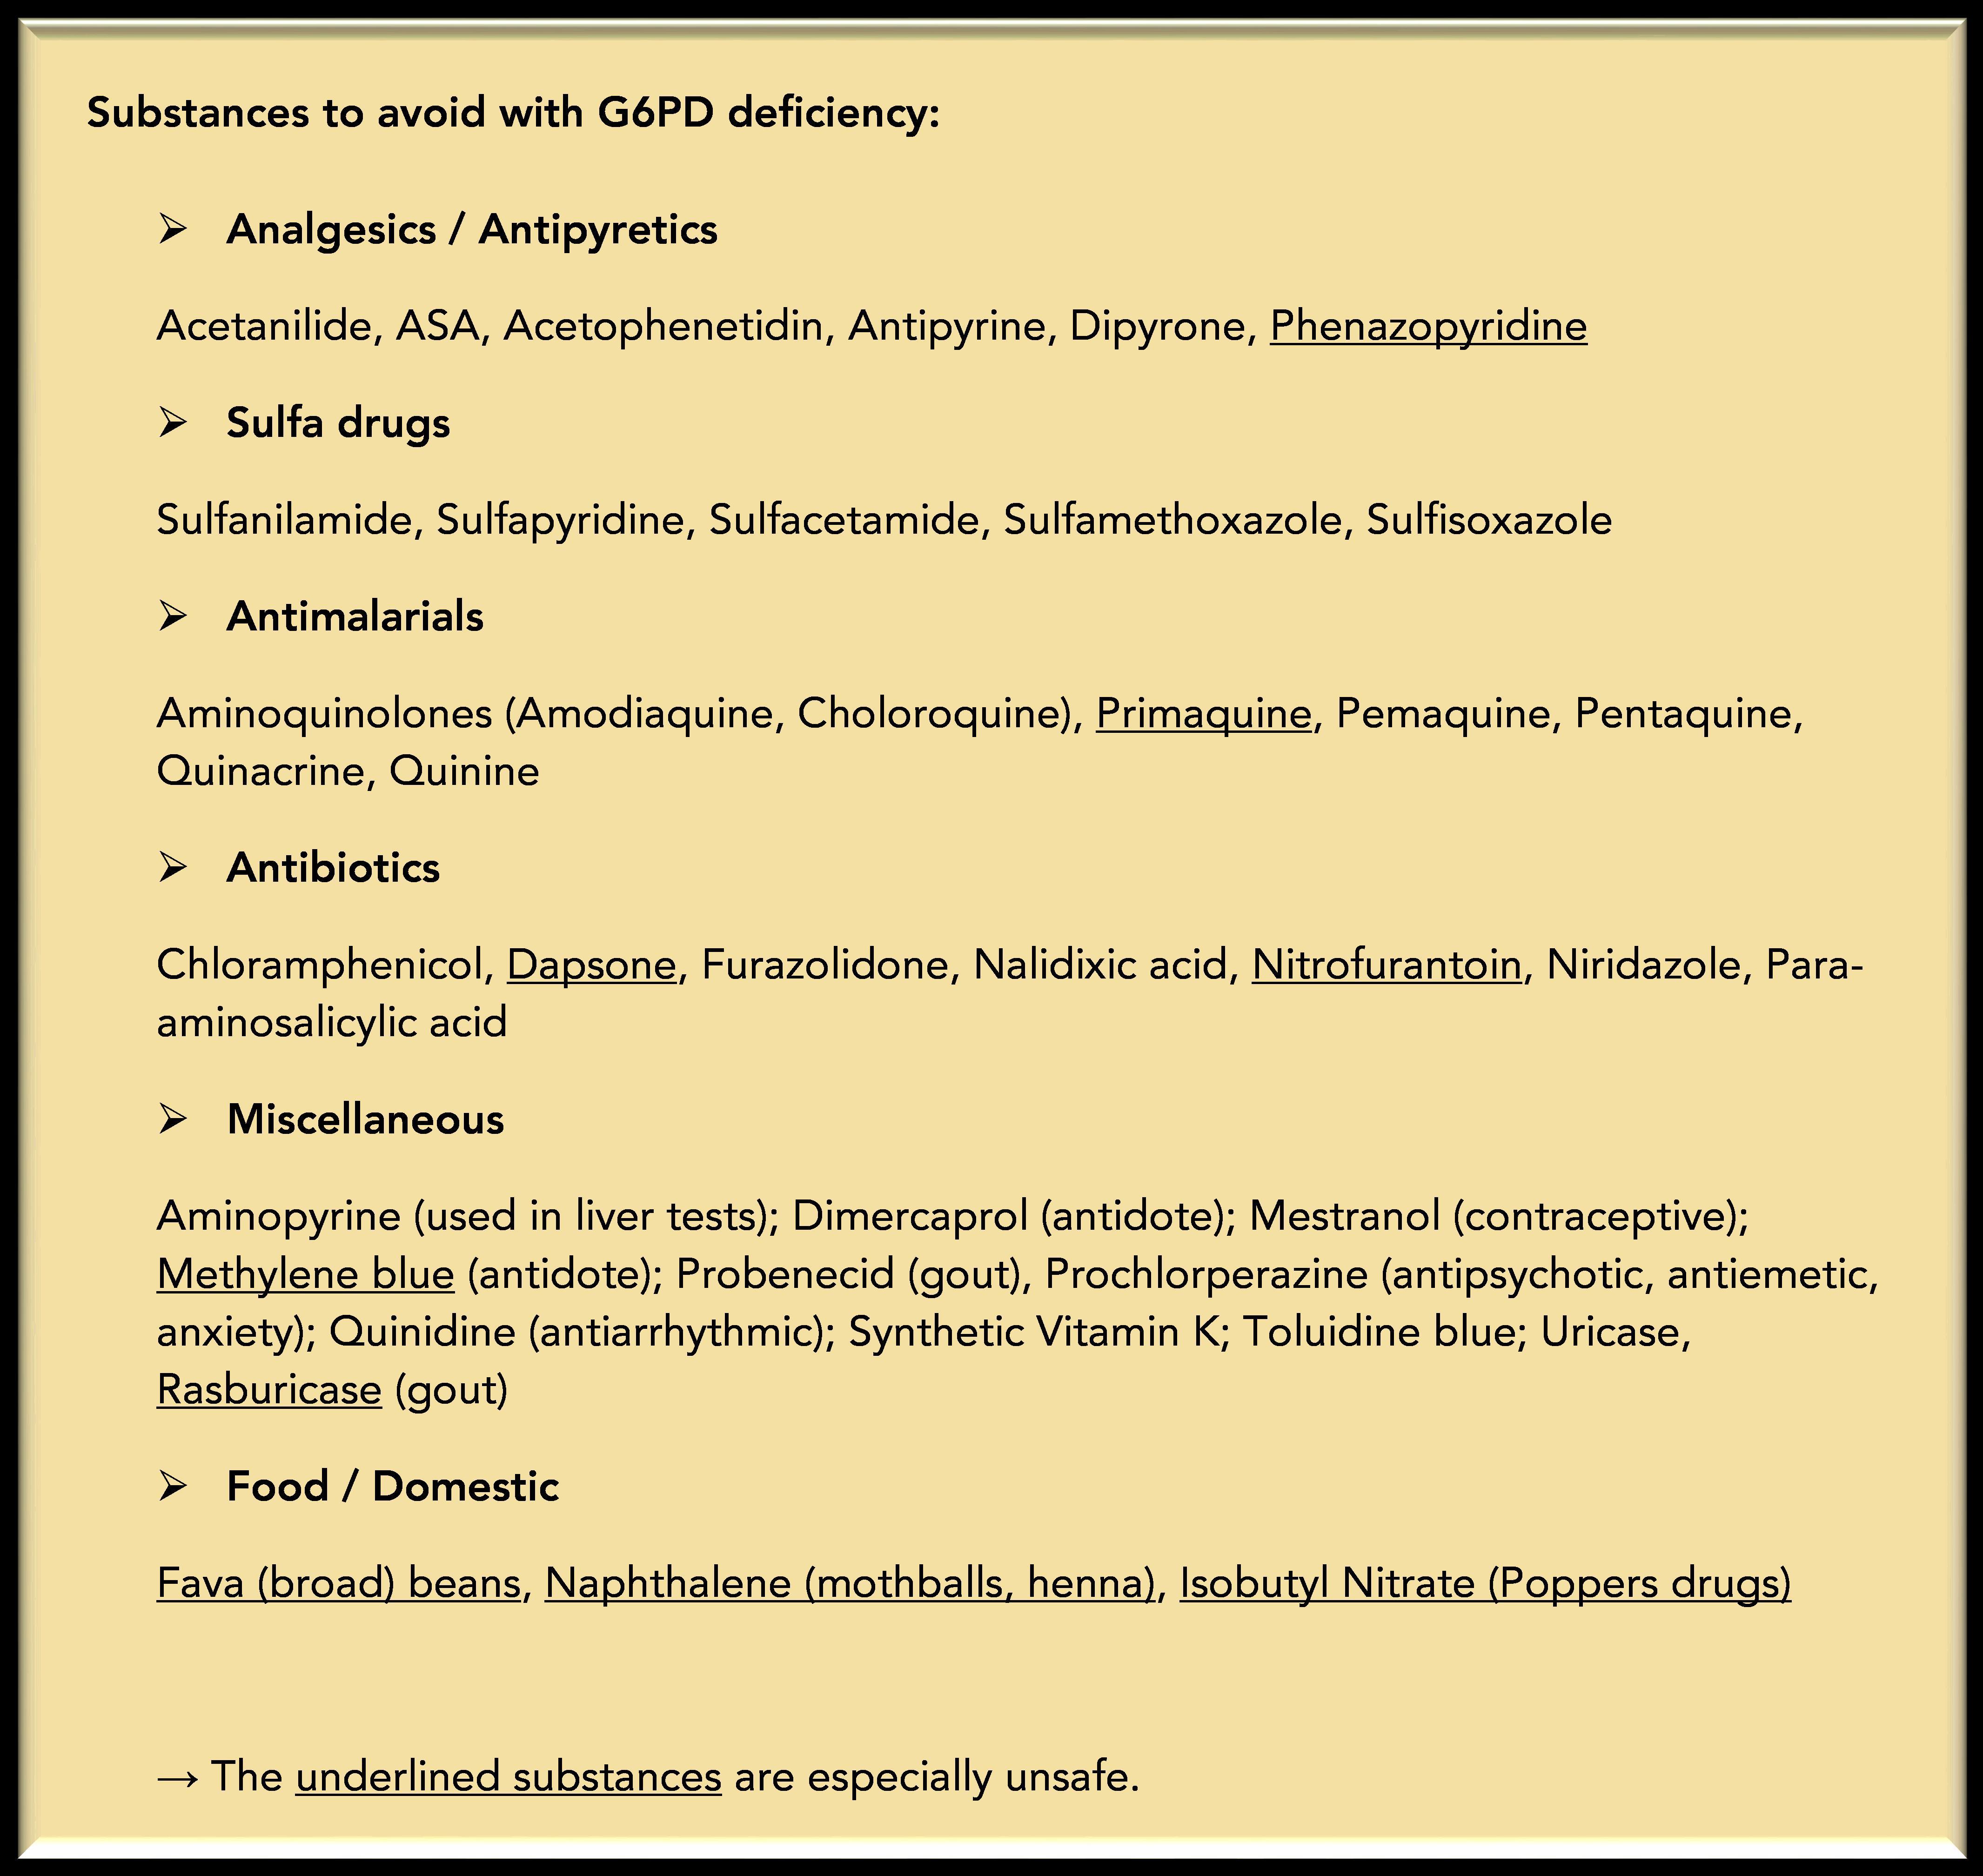 G6PD Deficiency - Substances to Avoid